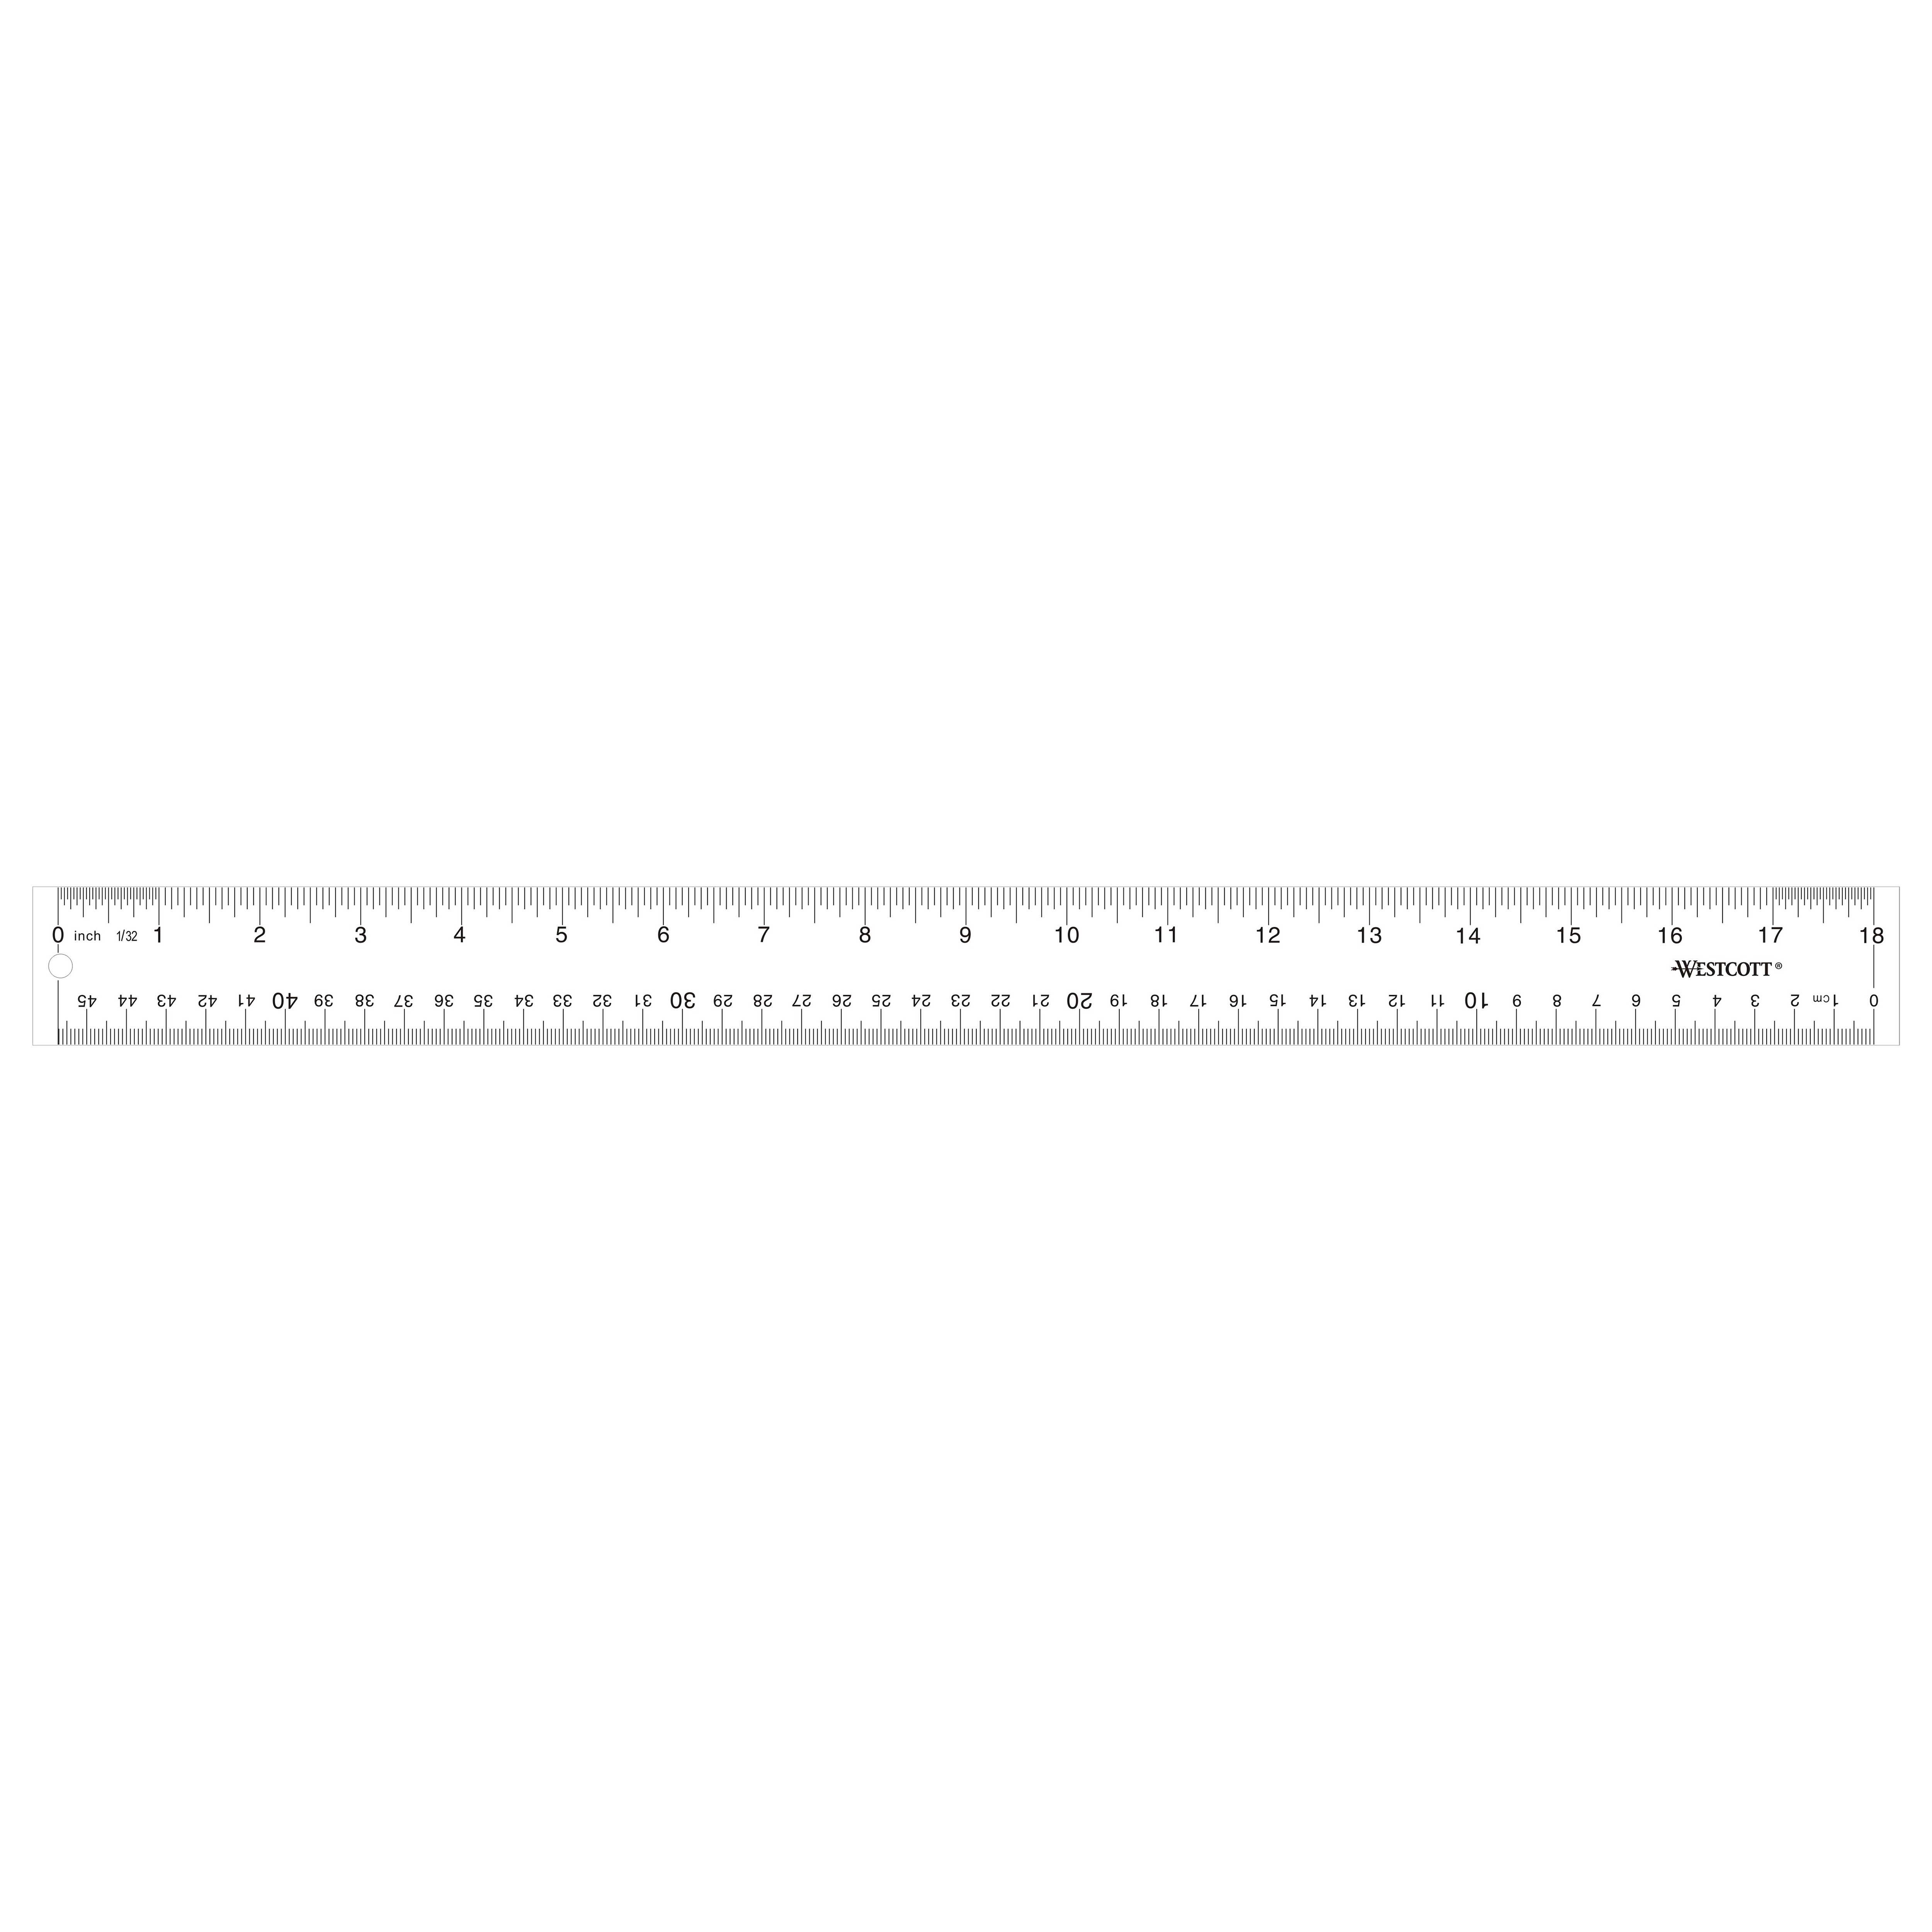 Transparent Plastic Graph Ruler, 45cm or 18in Long - Radiation Products  Design, Inc.